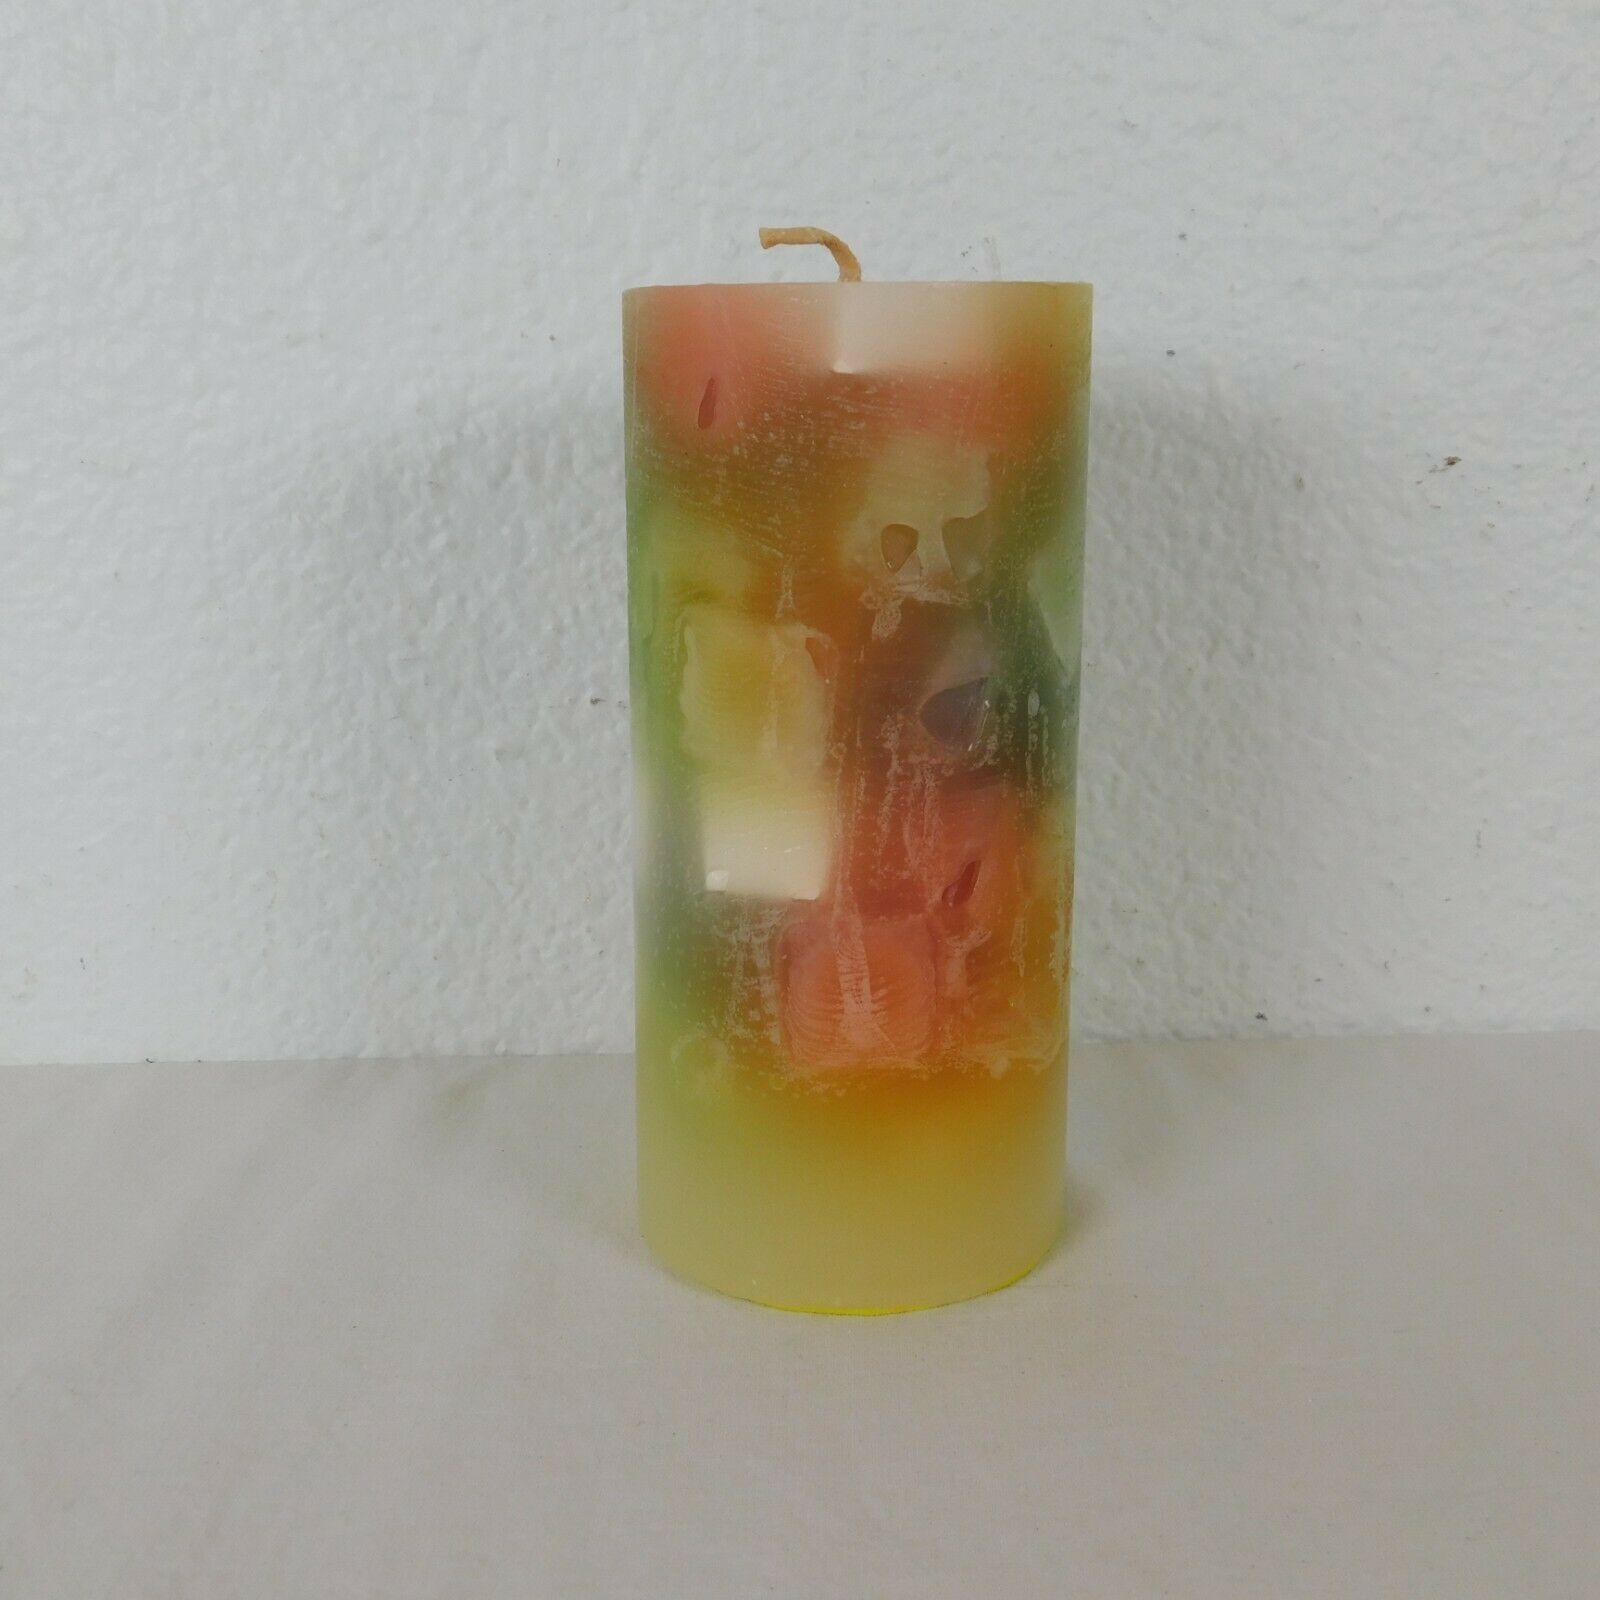 Chunky Wax Pillar Candle by Candle Lite 6" H x 2.5" D Multi-Color Pieces Inside - $9.75